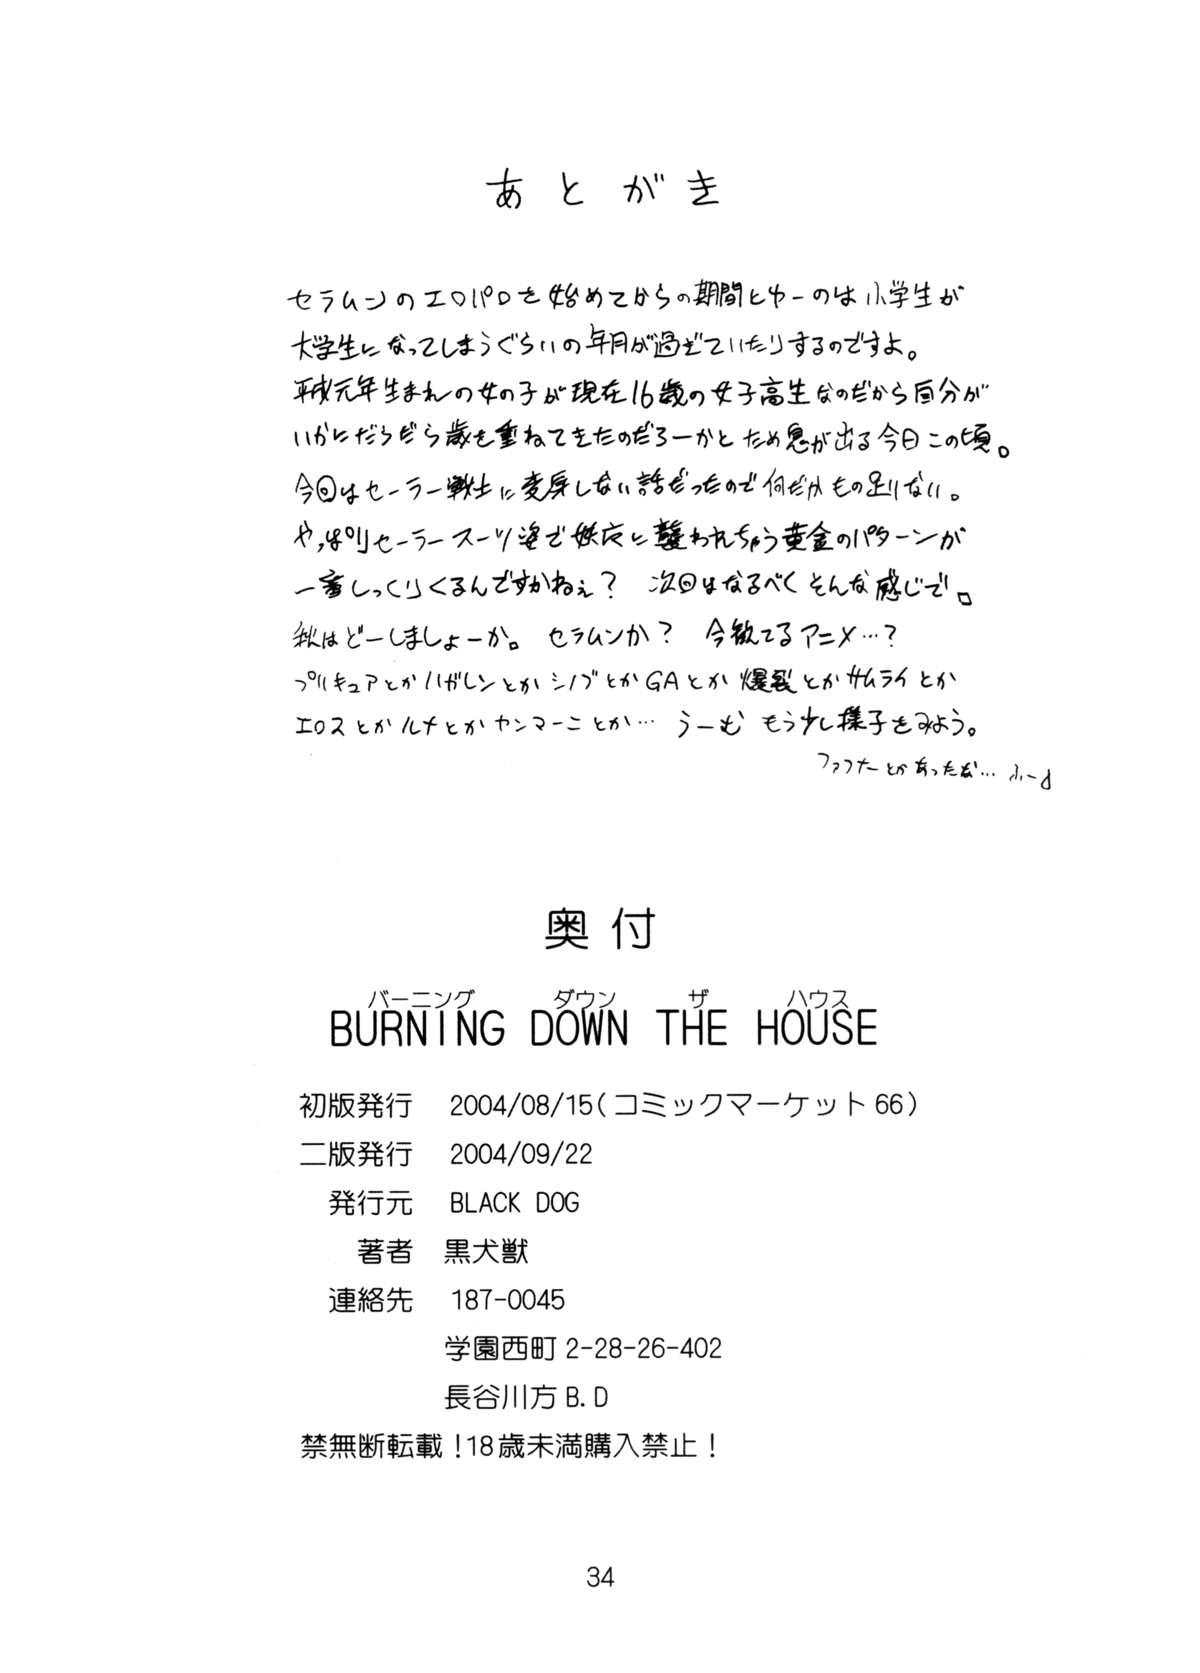 Burning Down the House 33